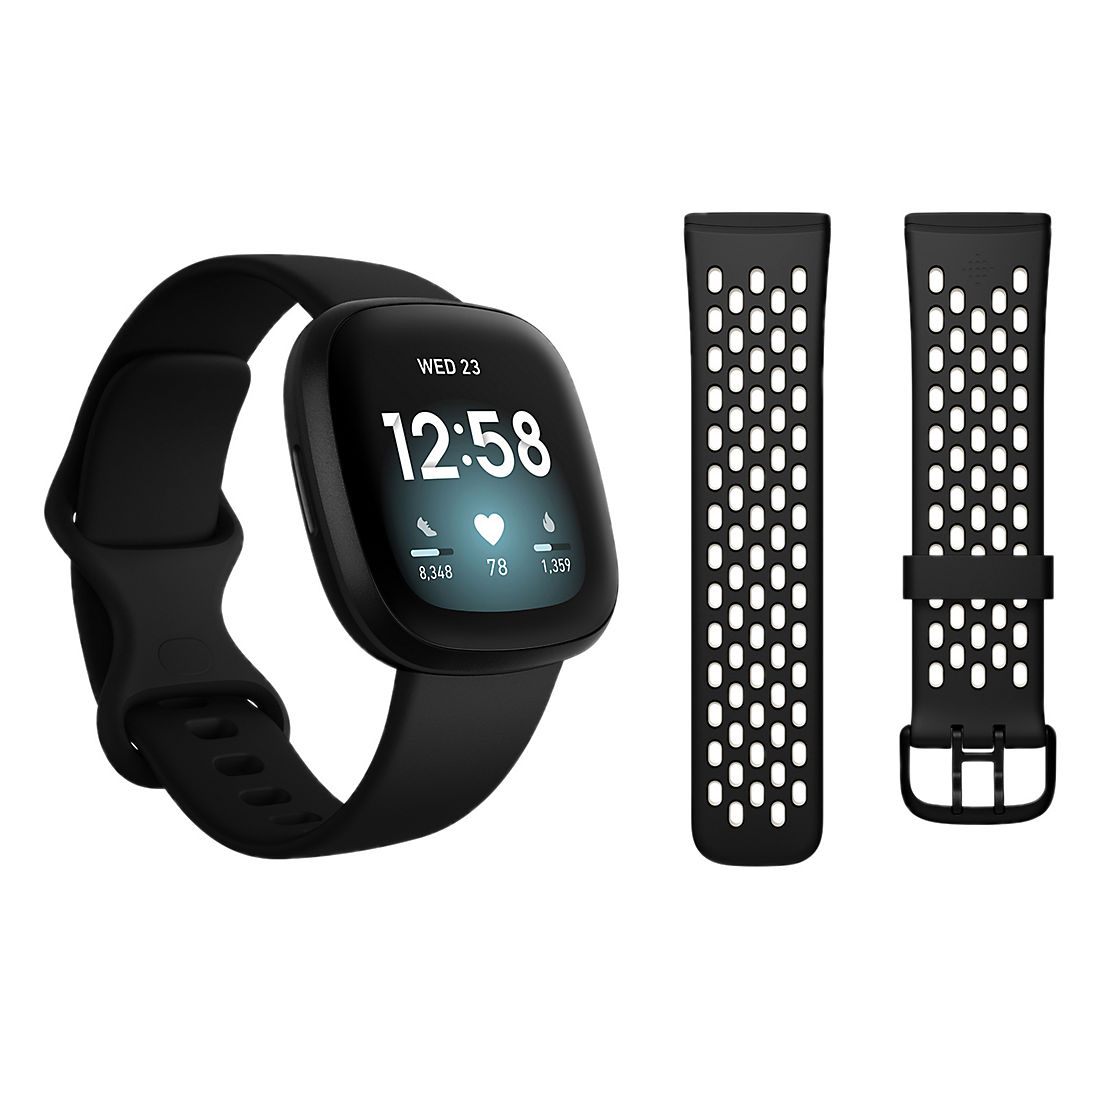 Fitbit Versa 3 Smartwatch Bundle with Small and Large Bands and Bonus Large  Accessory Band - Black